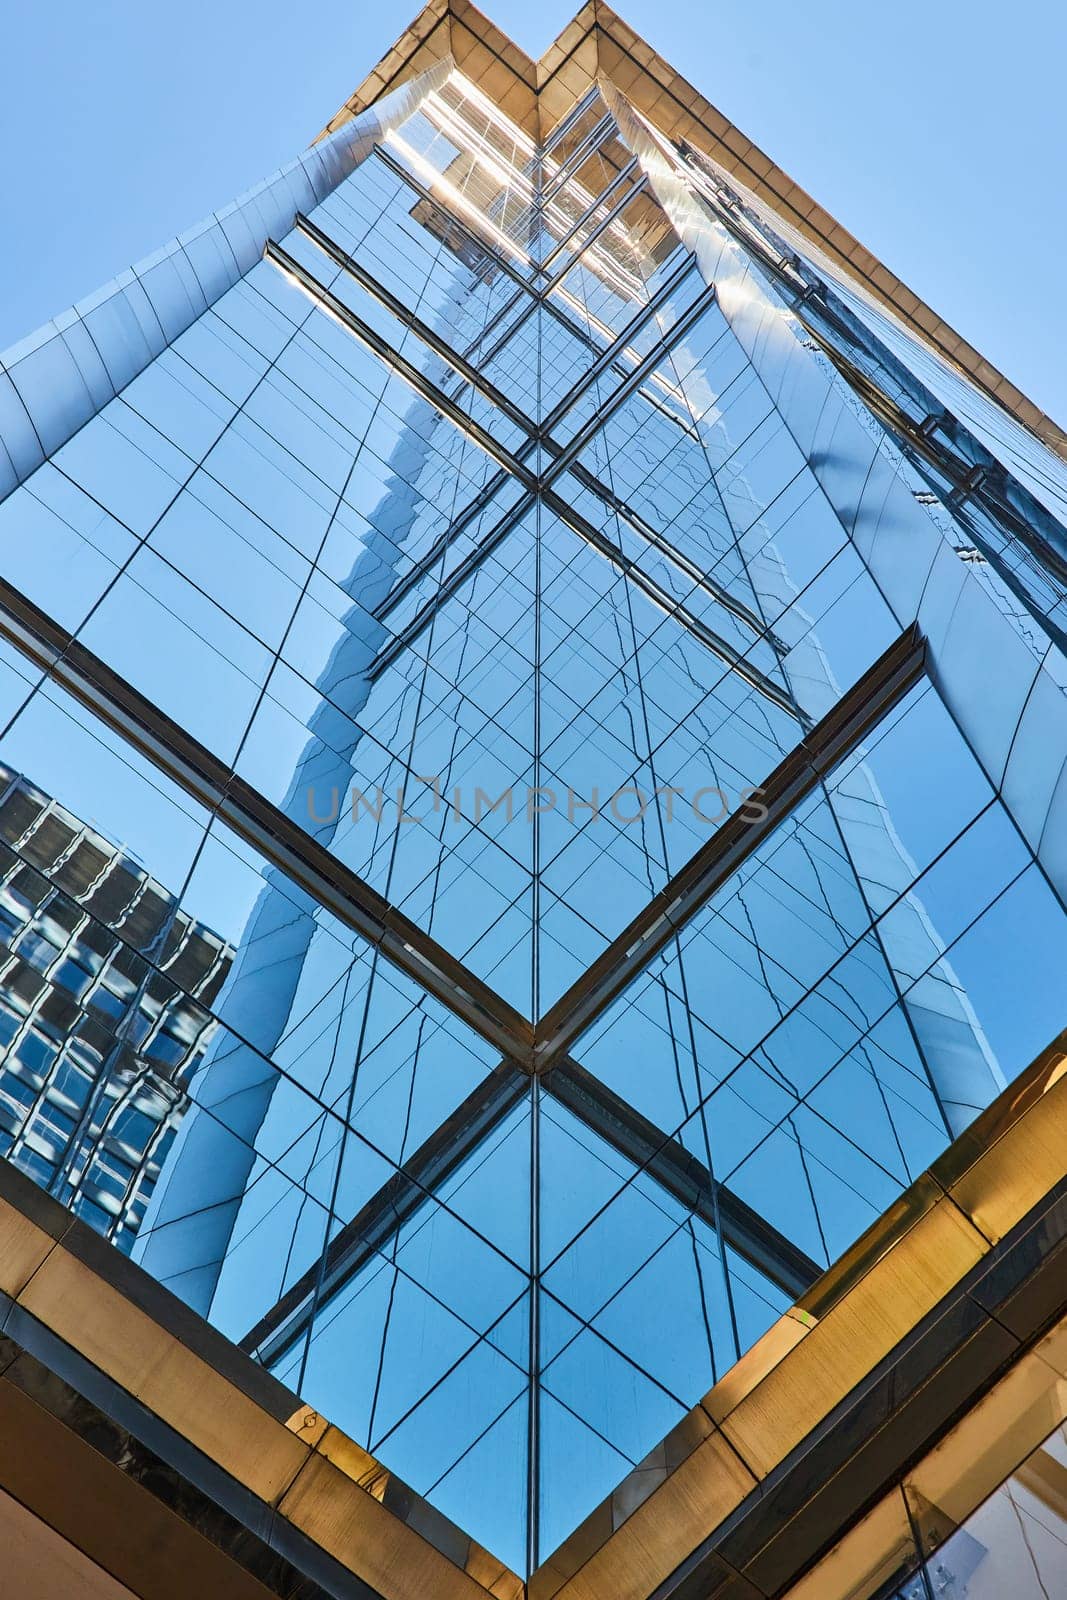 Middle upward view of blue windows of tall skyscraper creating mirror image on summer day by njproductions